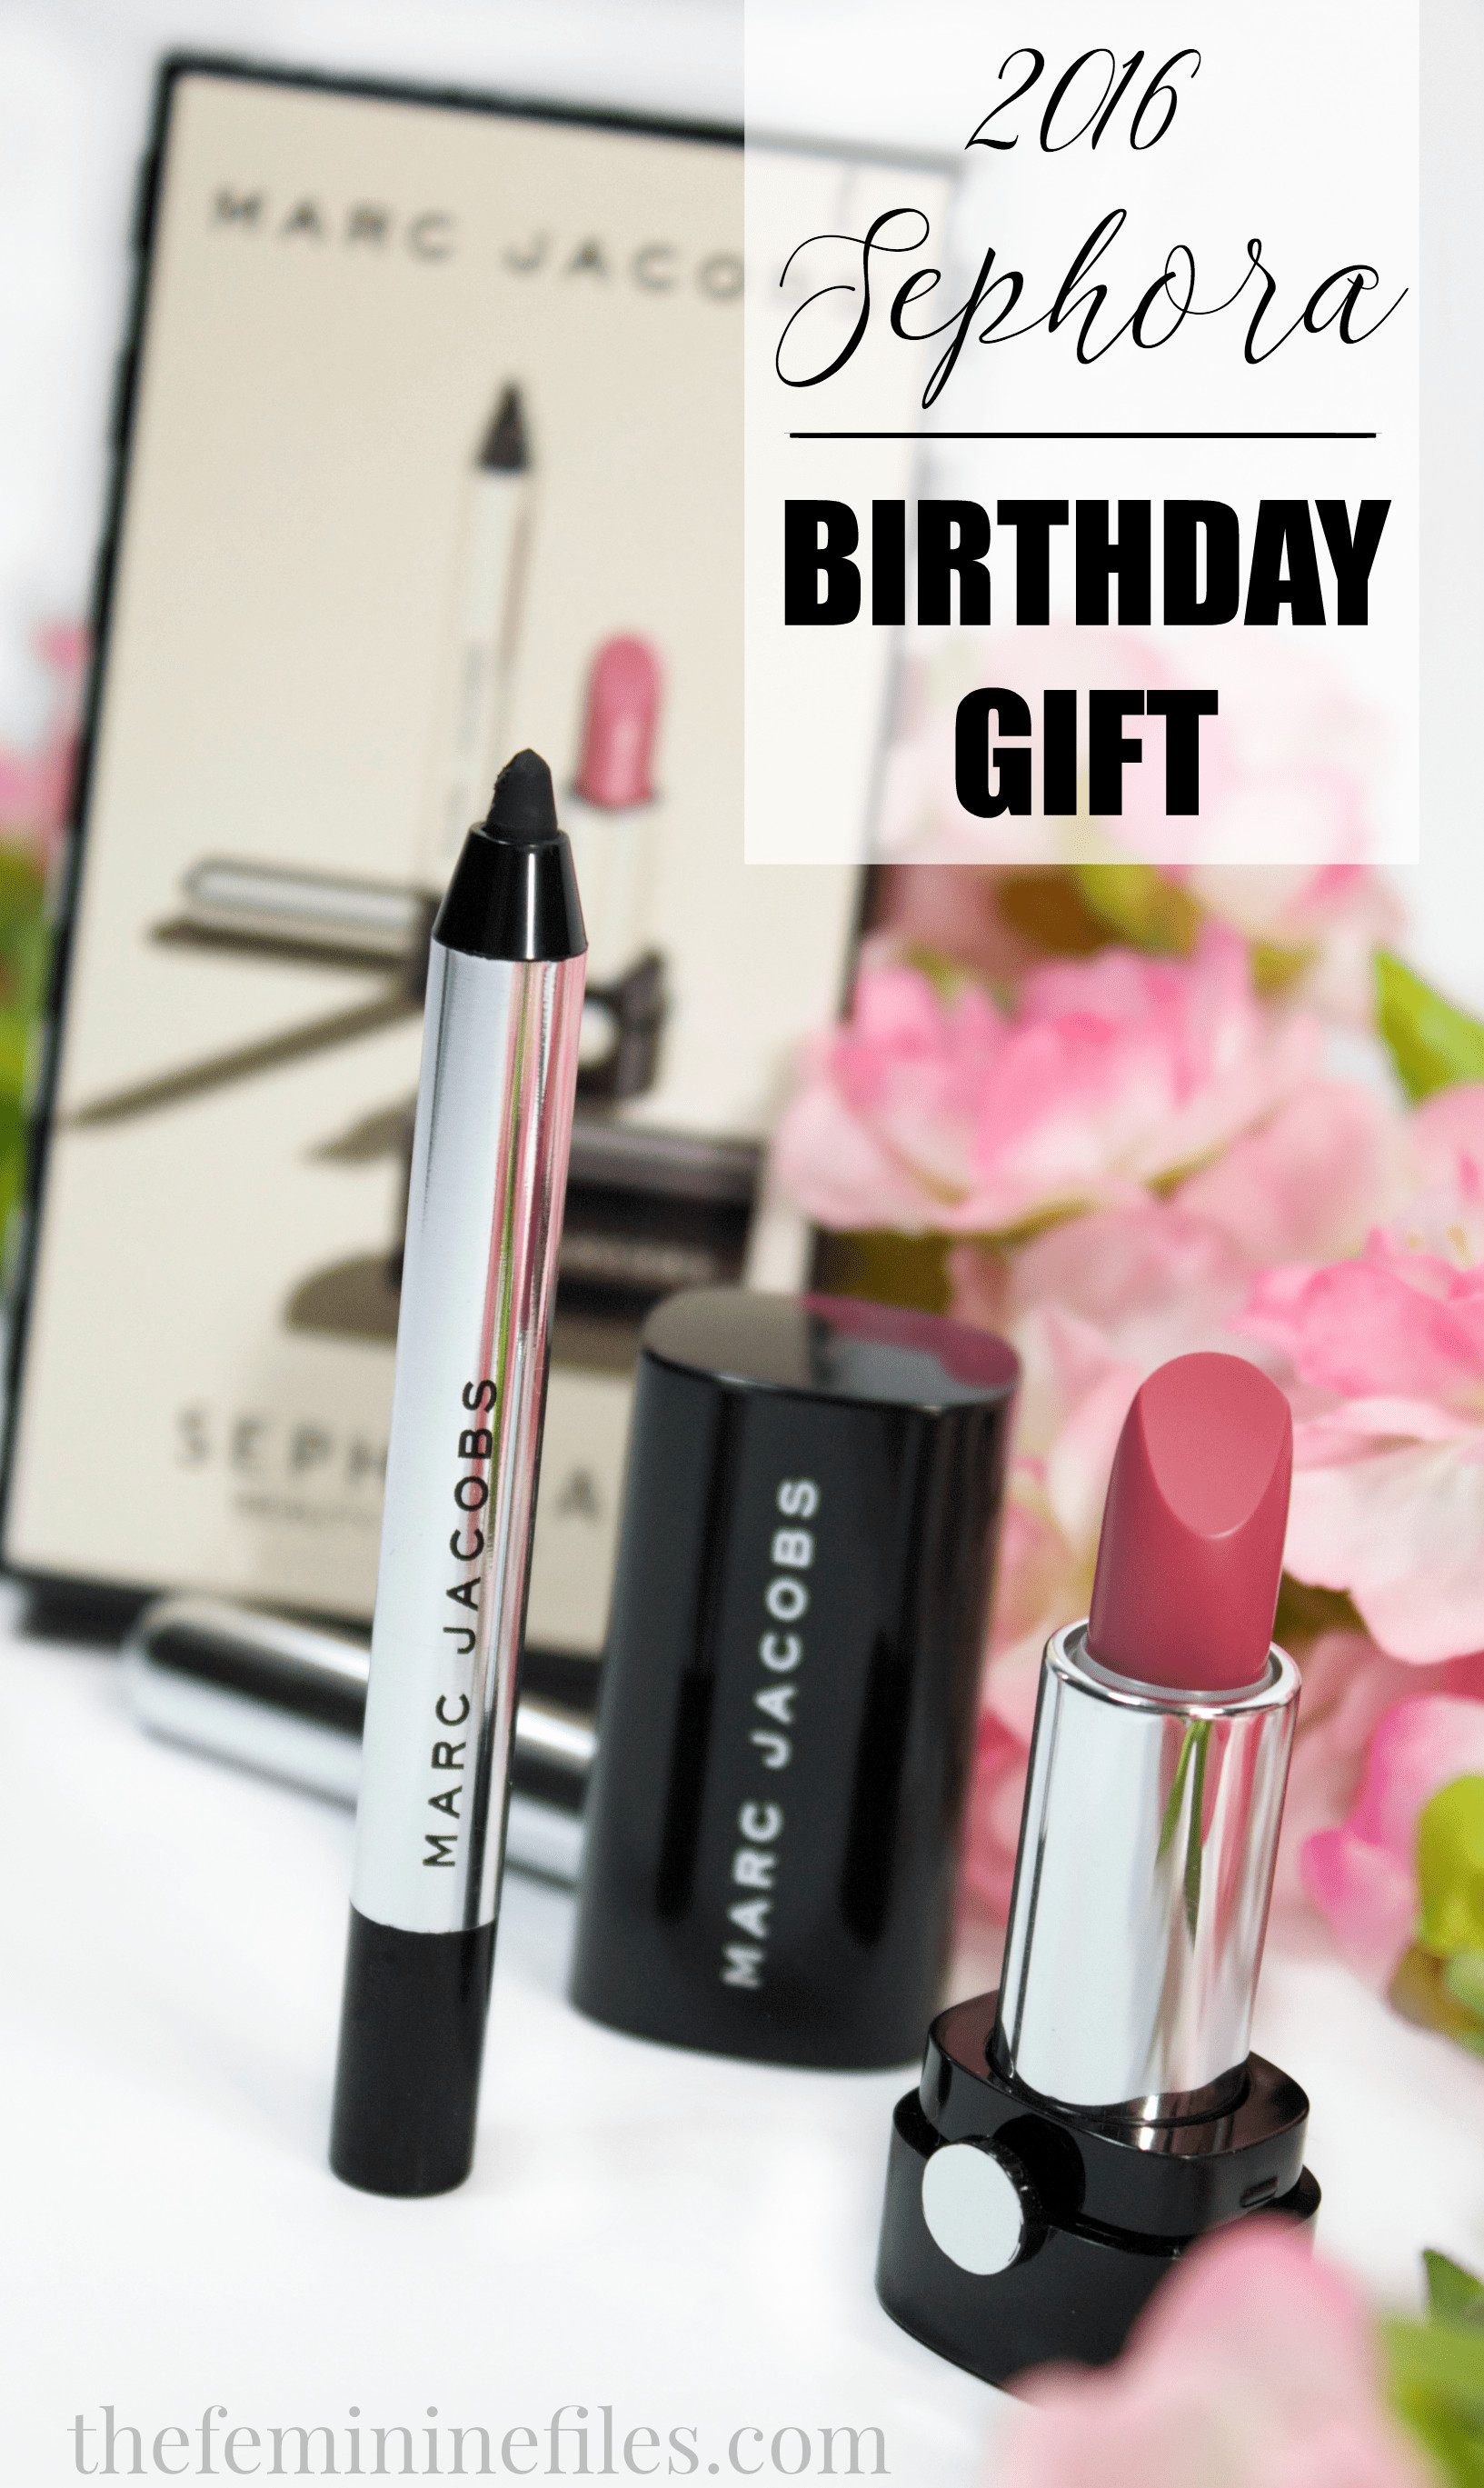 Best ideas about Sephora Birthday Gifts
. Save or Pin 2016 SEPHORA BIRTHDAY GIFT MARC JACOBS The Feminine Files Now.